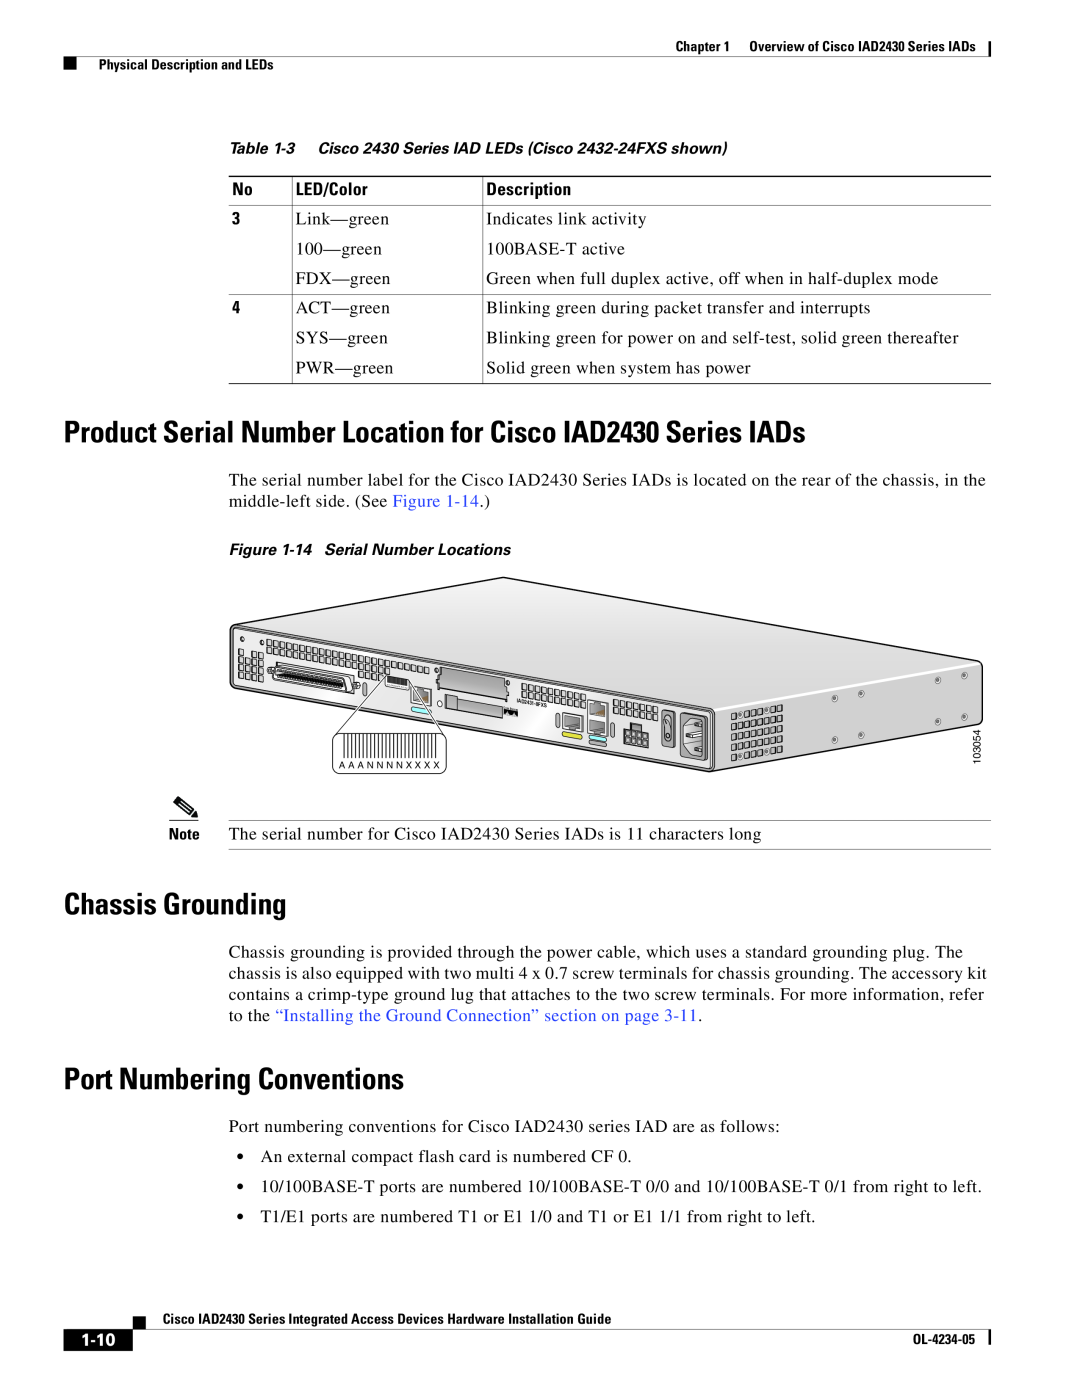 Cisco Systems Product Serial Number Location for Cisco IAD2430 Series IADs, Chassis Grounding, 1-10, LED/Color 